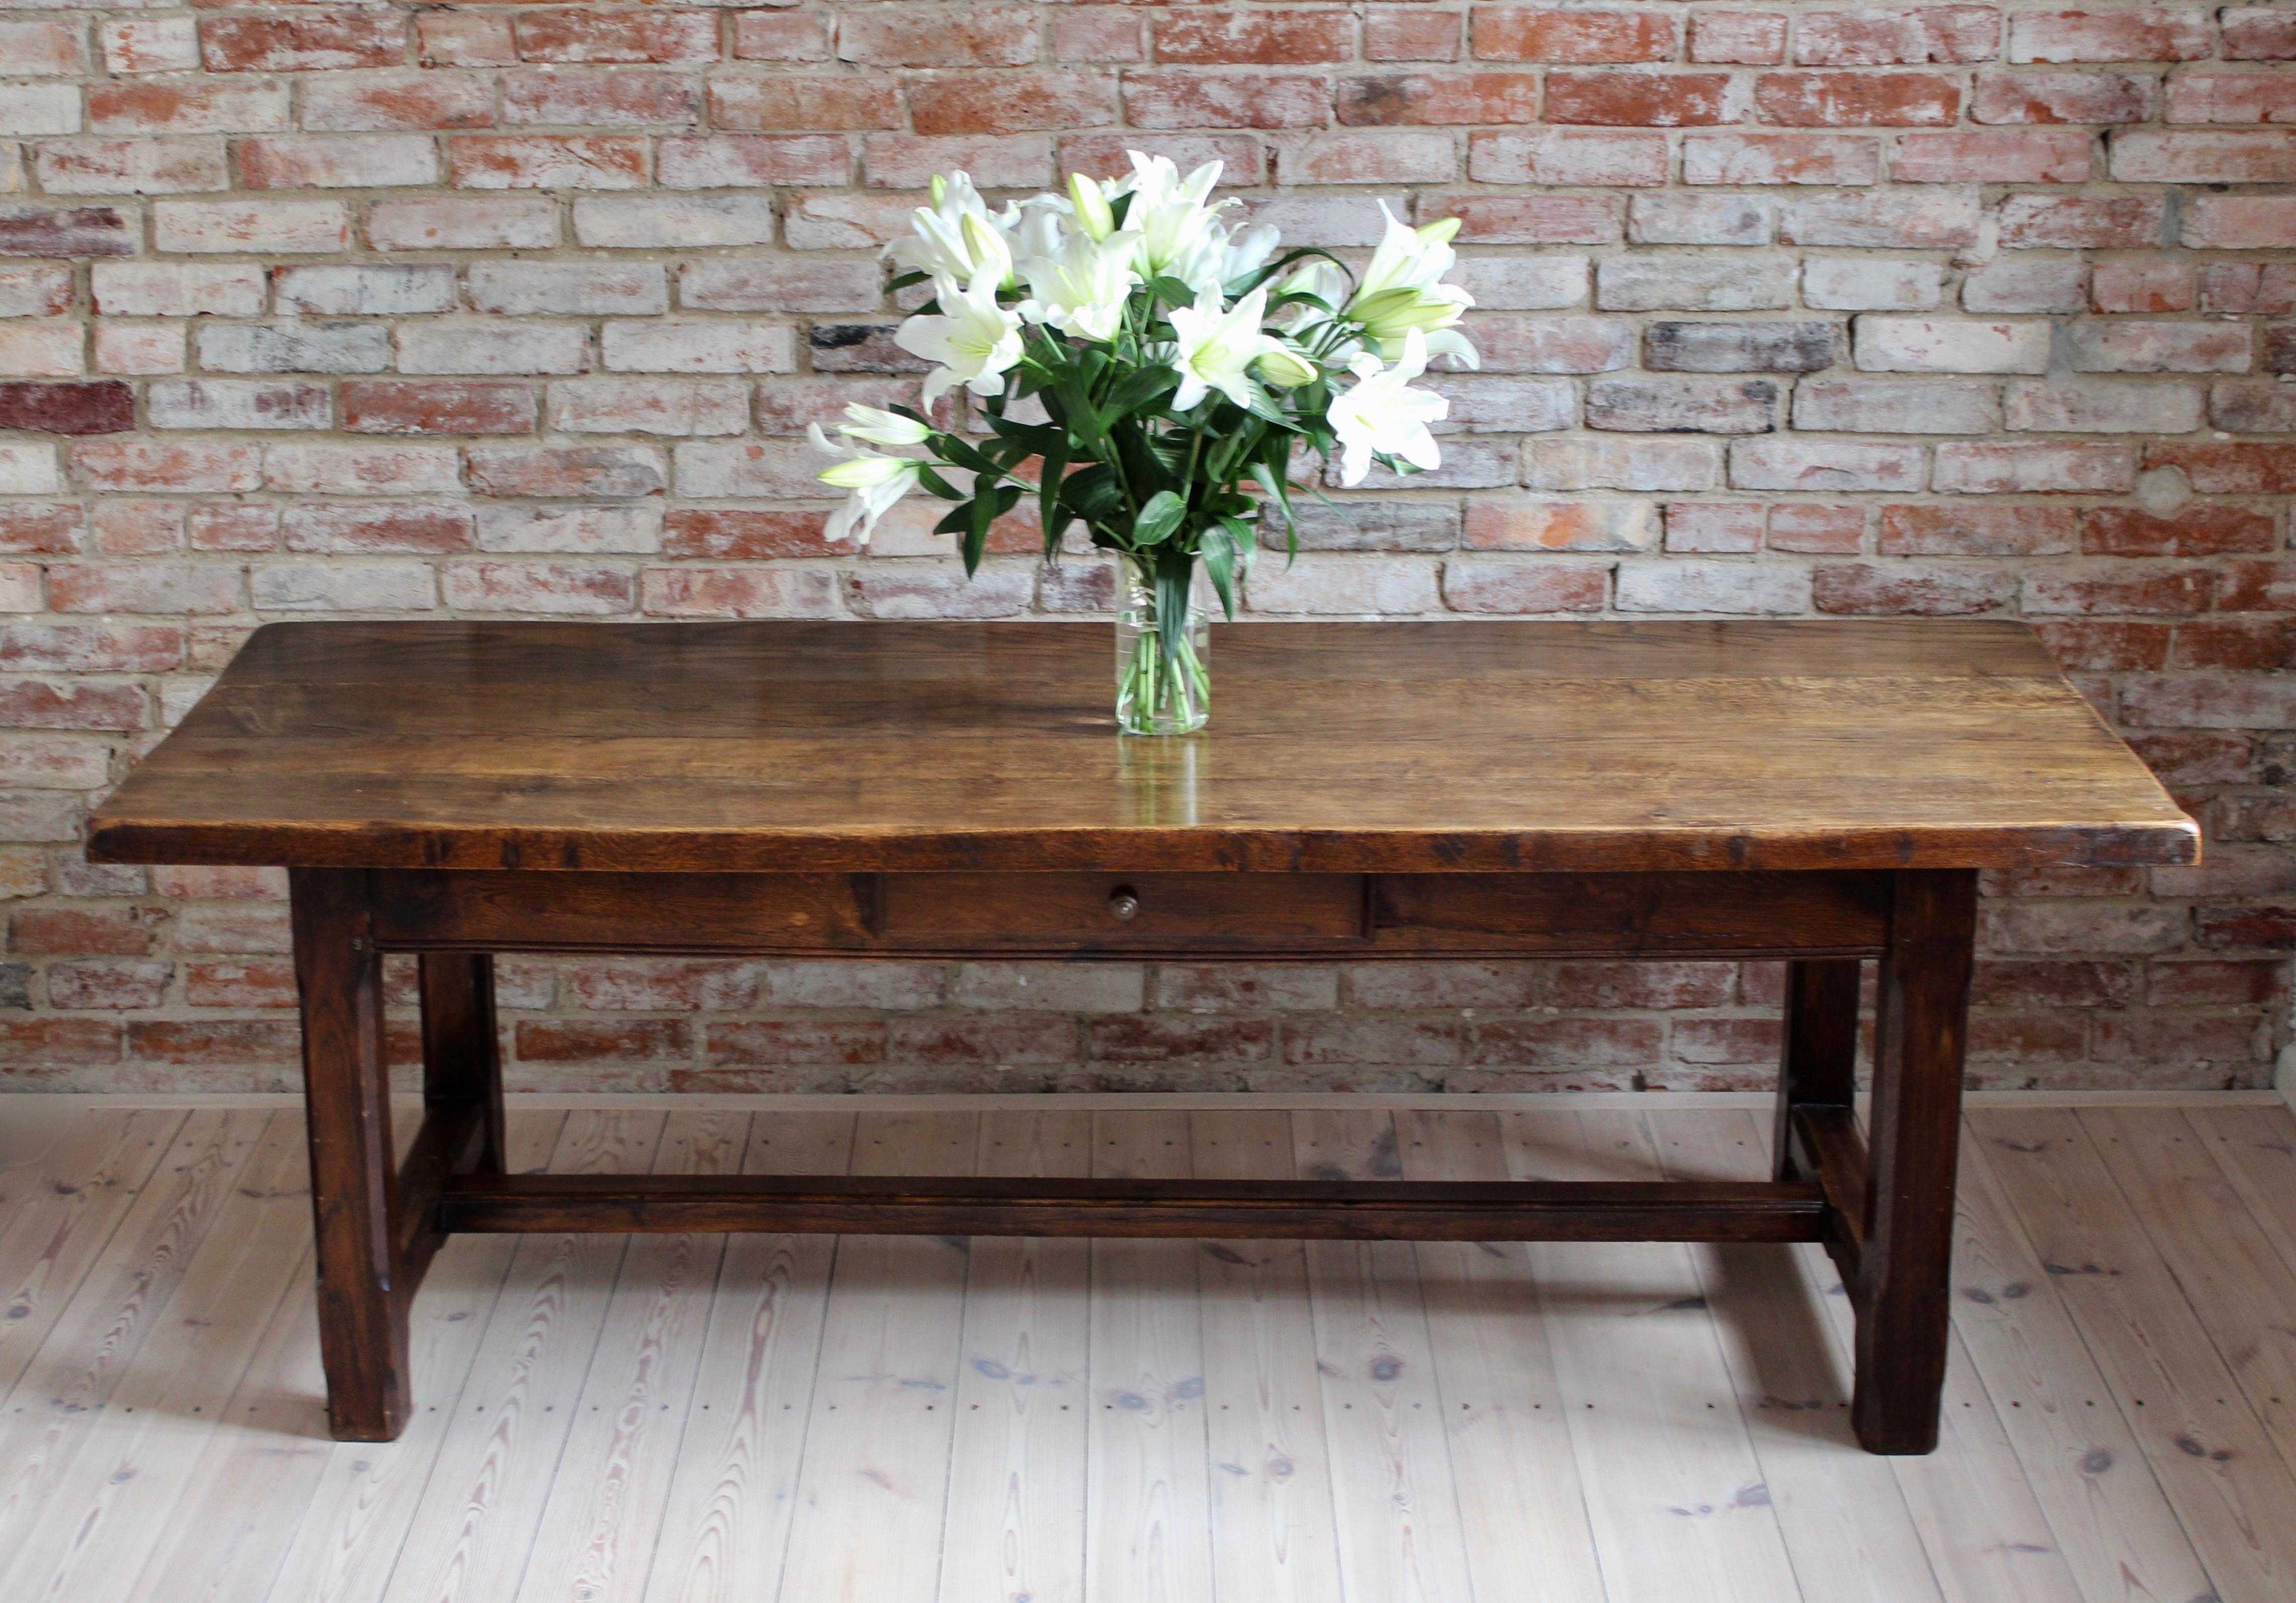 This gorgeous farm table was made in France, circa 19th/20th century. It has acquired some unique patina over years of use and hundreds of family gatherings. Four wide, oak boards comprise the table’s top, fixed together with pegs and holes joinery